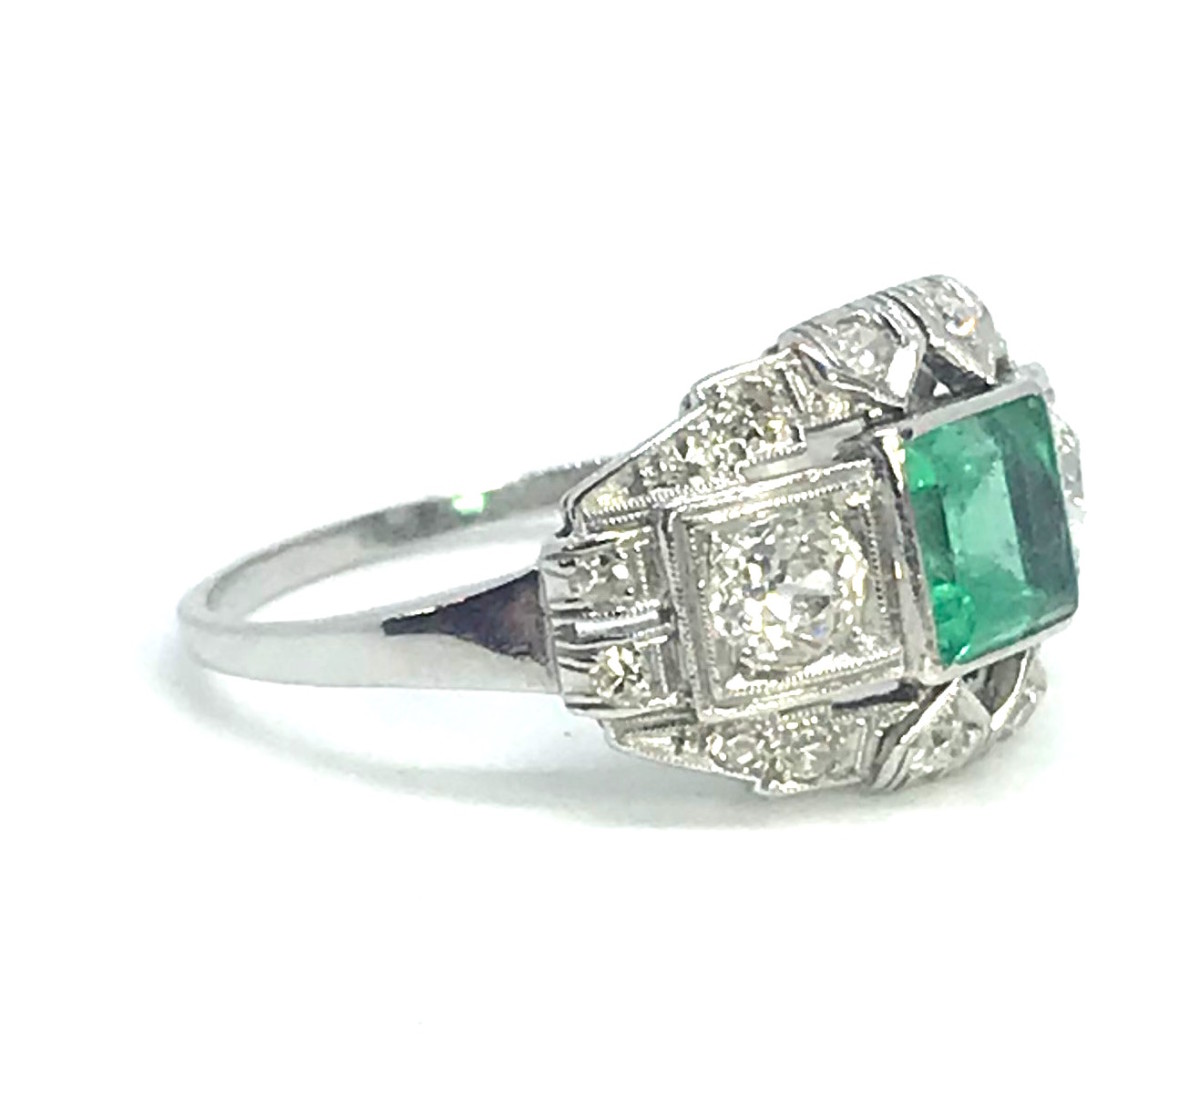 Antique Art Deco Emerald And Diamond Ring Jewellery Discovery